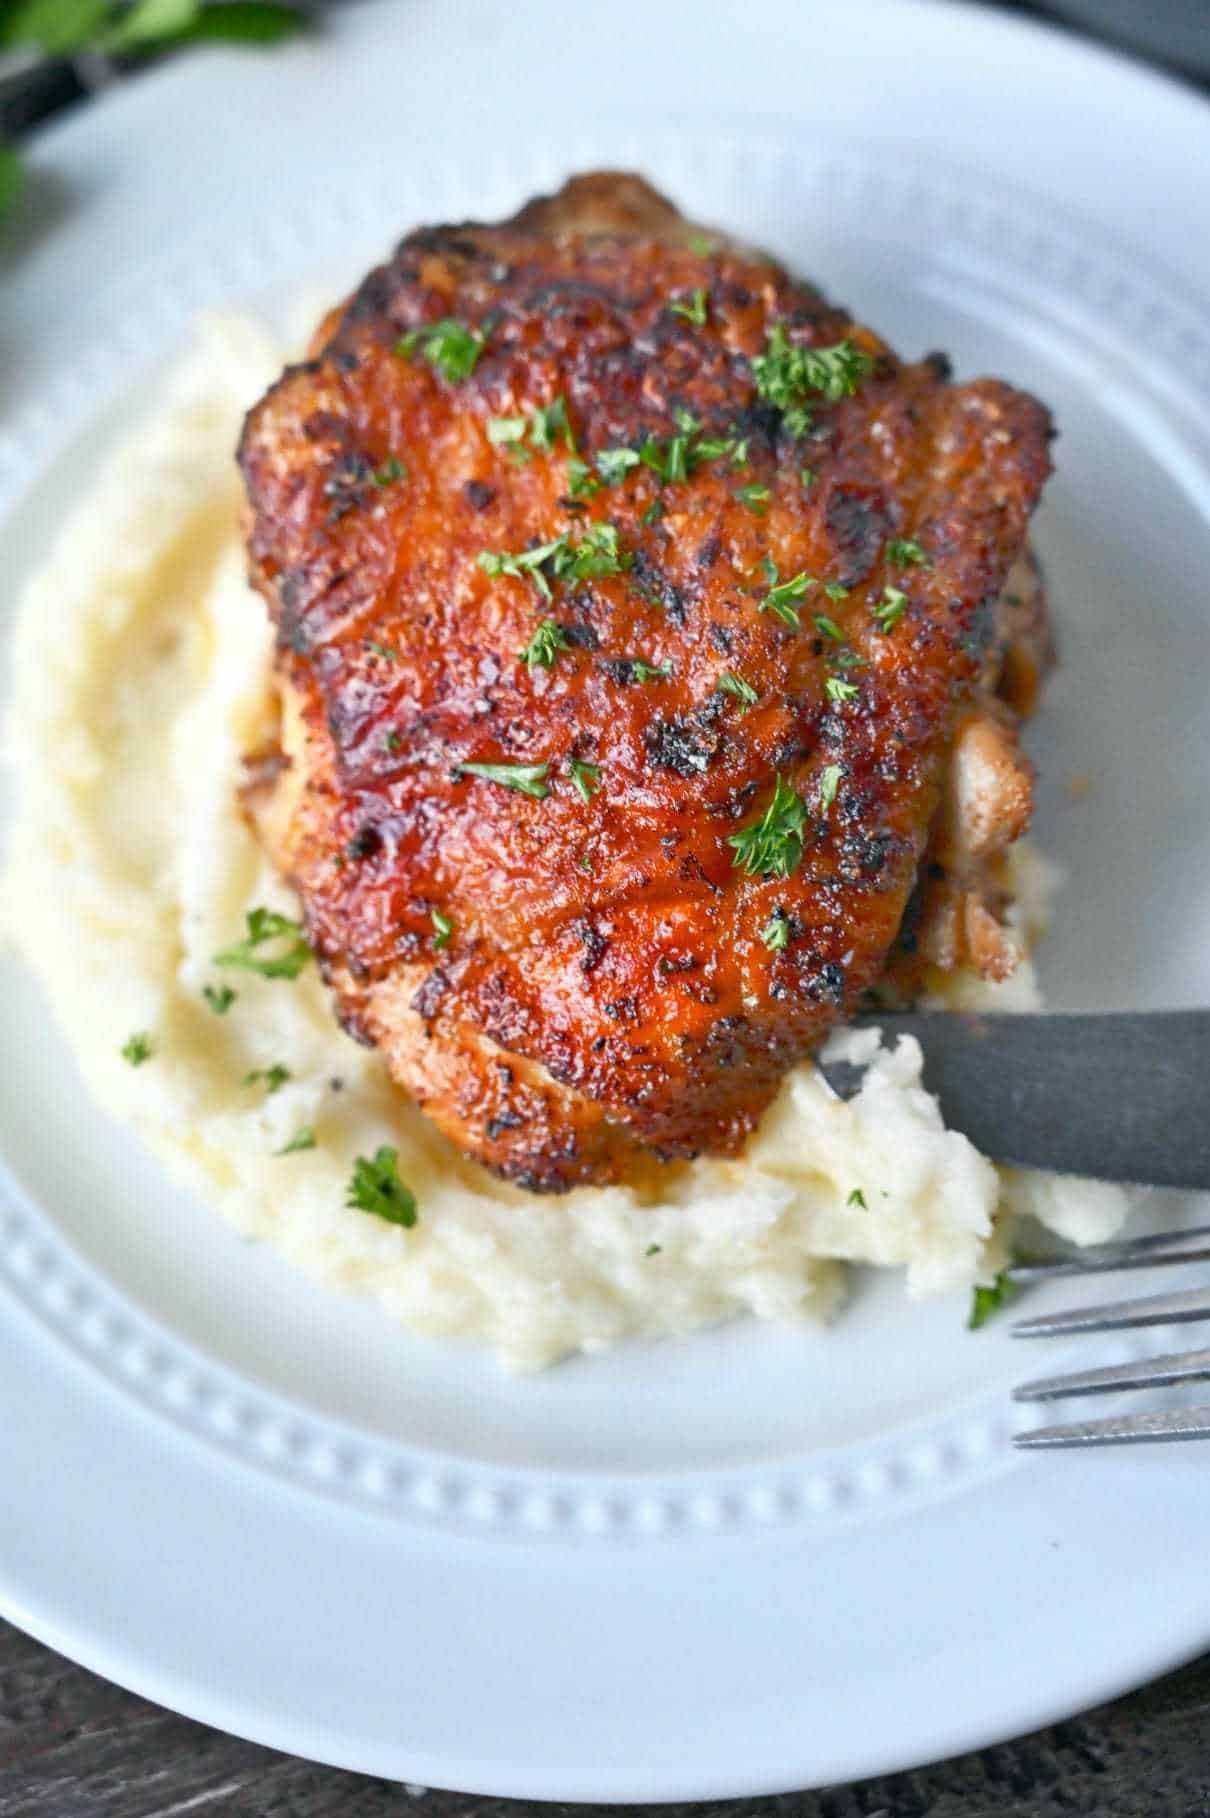 Crispy chicken thigh on a pile of mashed potatoes.